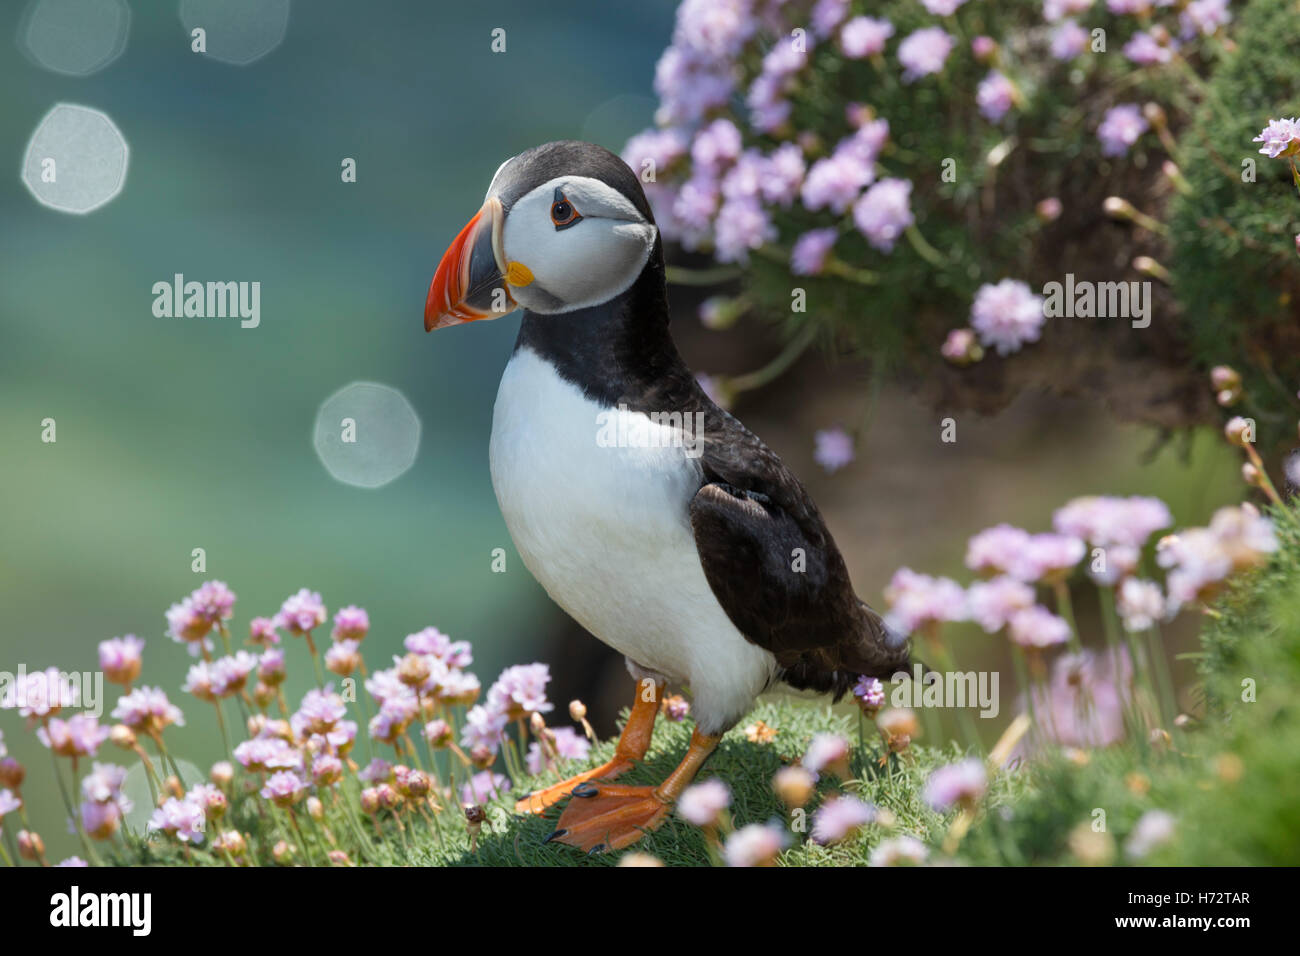 Atlantic puffin (fratercula arctica) and thrift flowers on Great Saltee Island, County Wexford, Ireland. Stock Photo